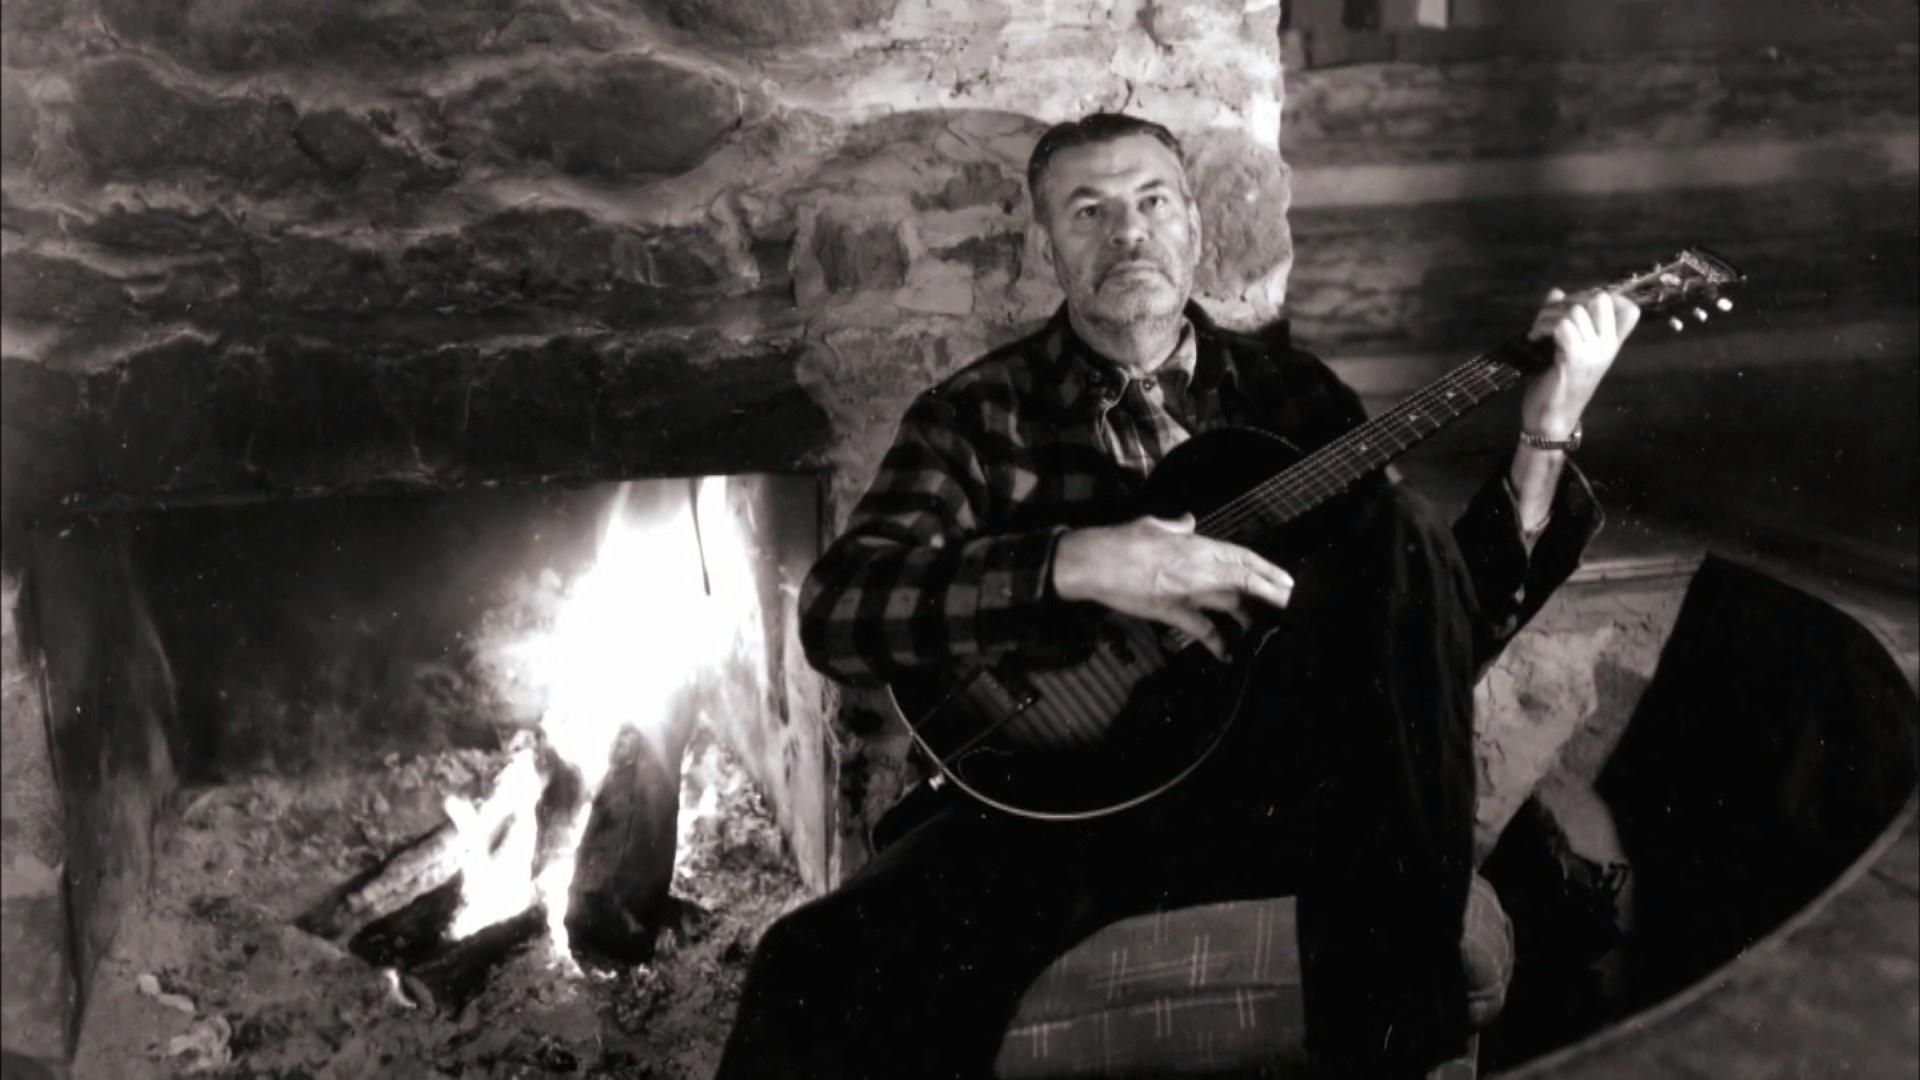 A man with a guitar sits in front of a fireplace.